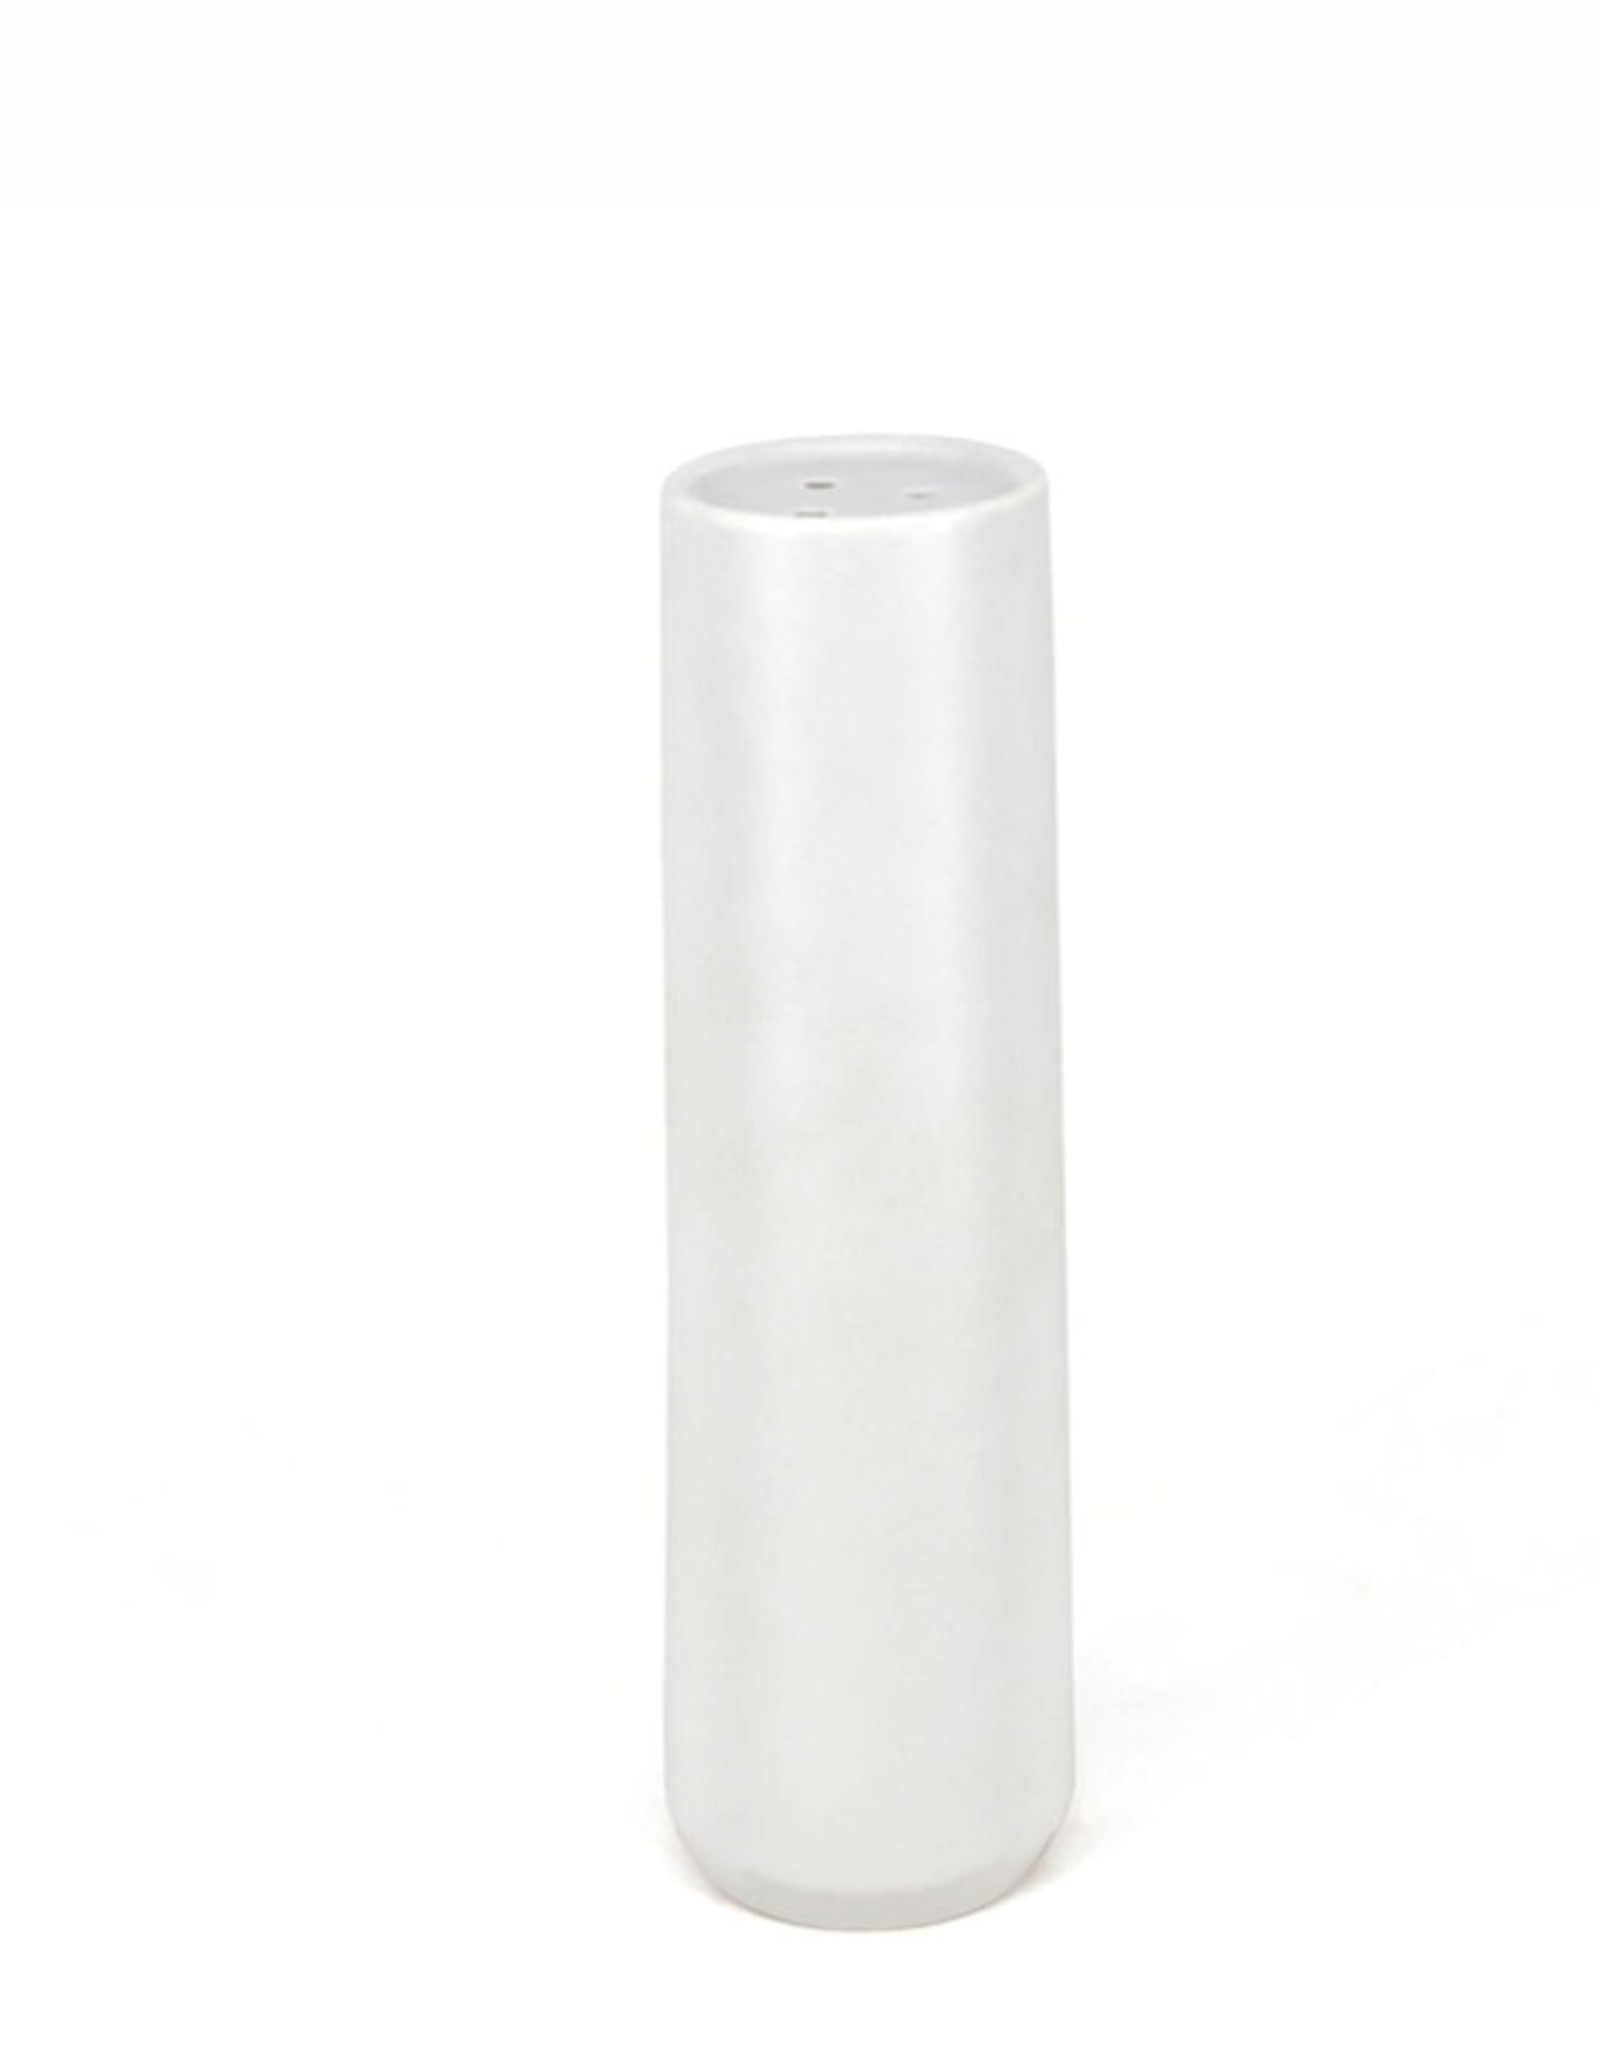 The Independent Mercantile Co. DCO - Salt or Pepper Shaker / Tall, White